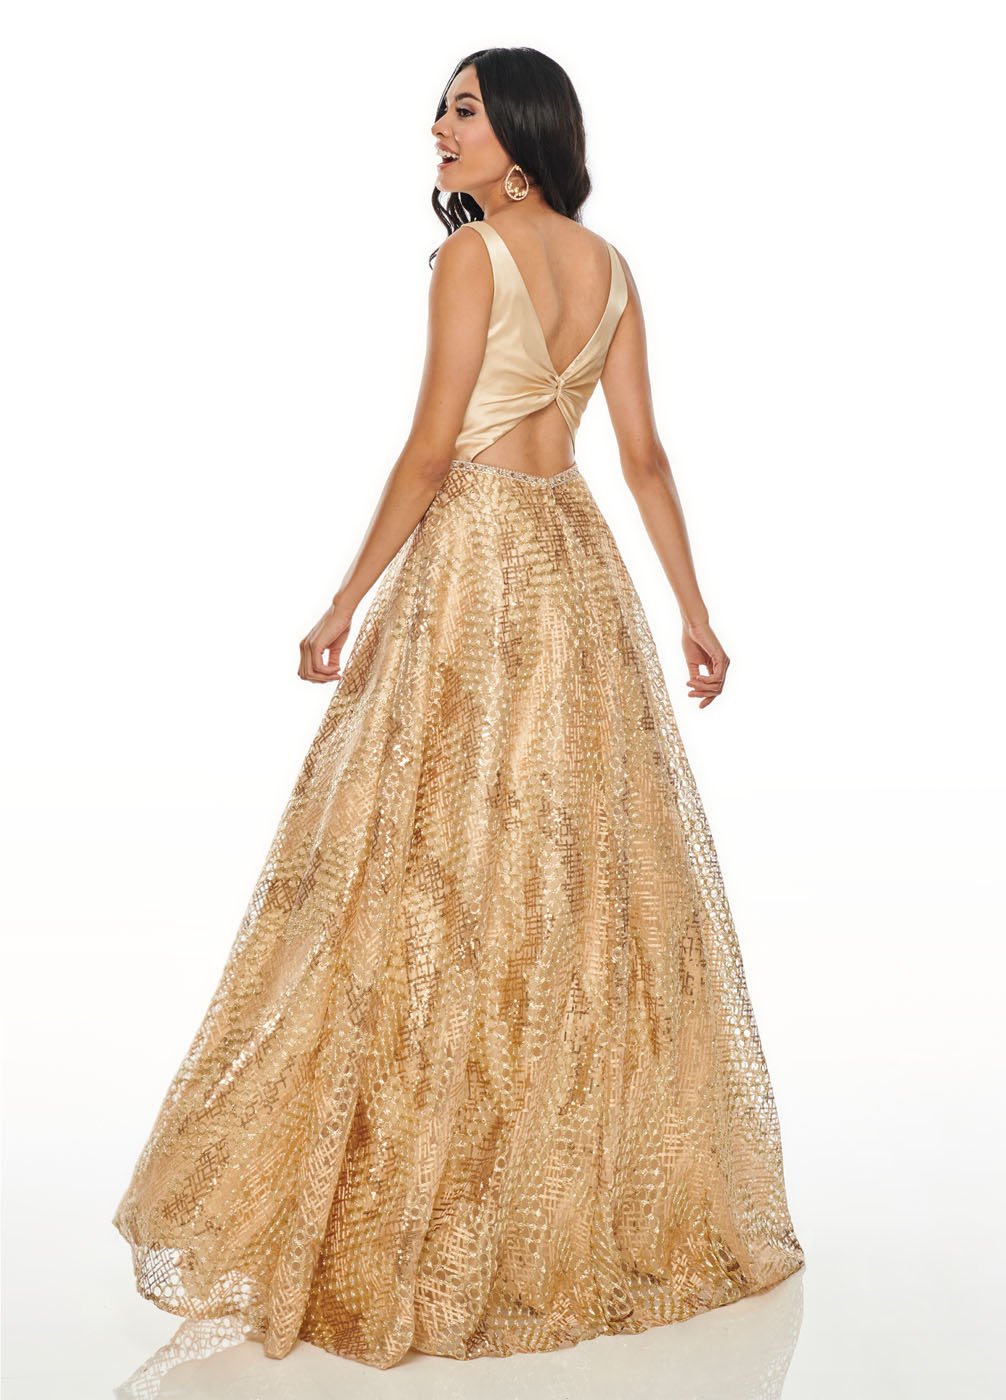 Rachel Allan 7031 dress images in these colors: Black Gold, Gold.